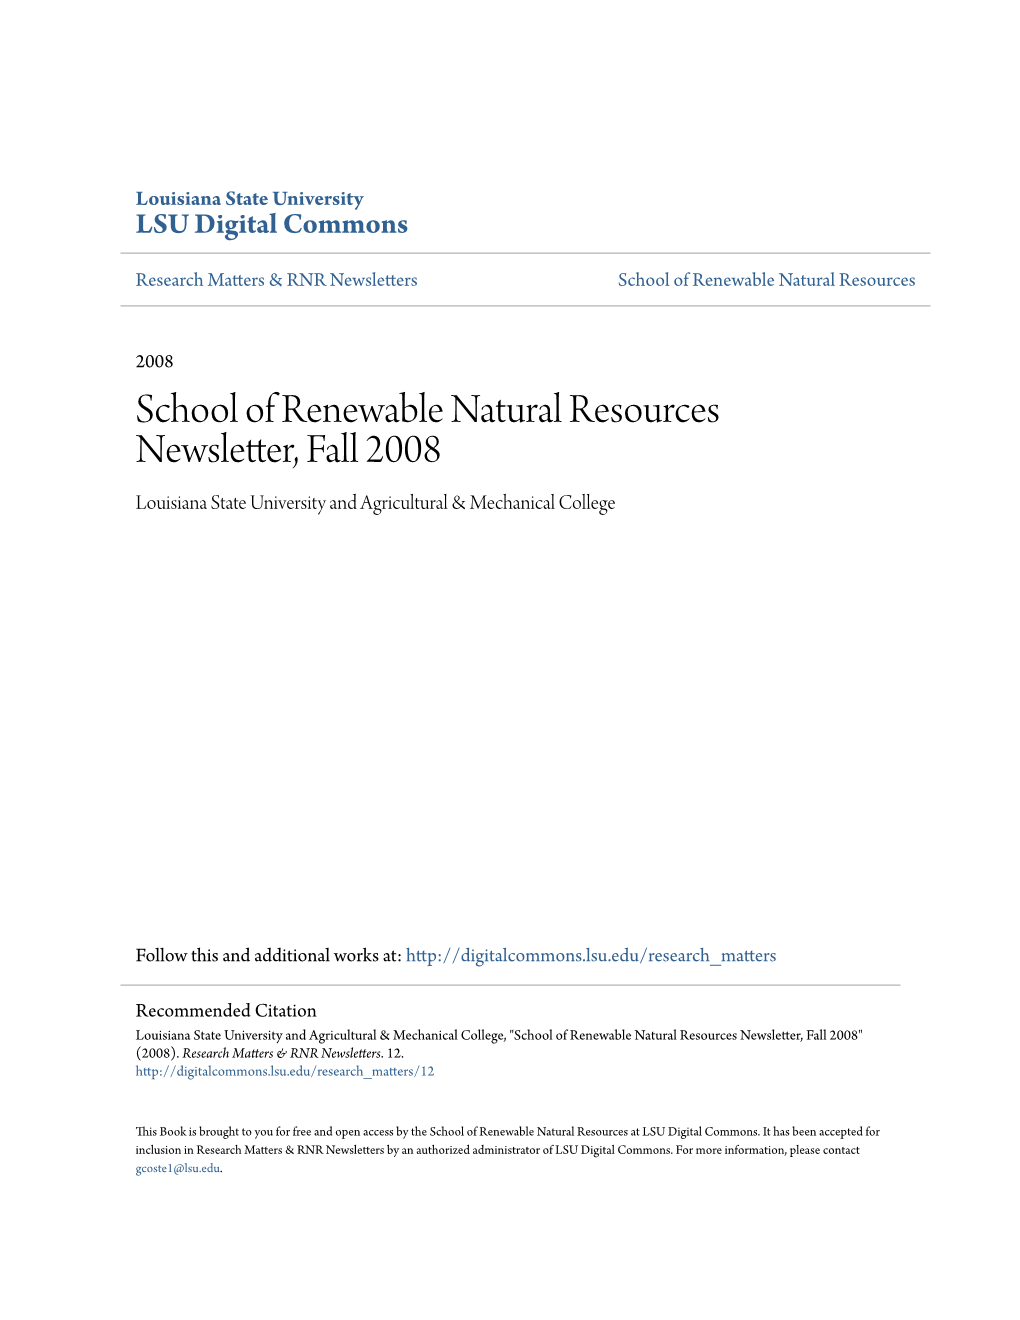 School of Renewable Natural Resources Newsletter, Fall 2008 Louisiana State University and Agricultural & Mechanical College